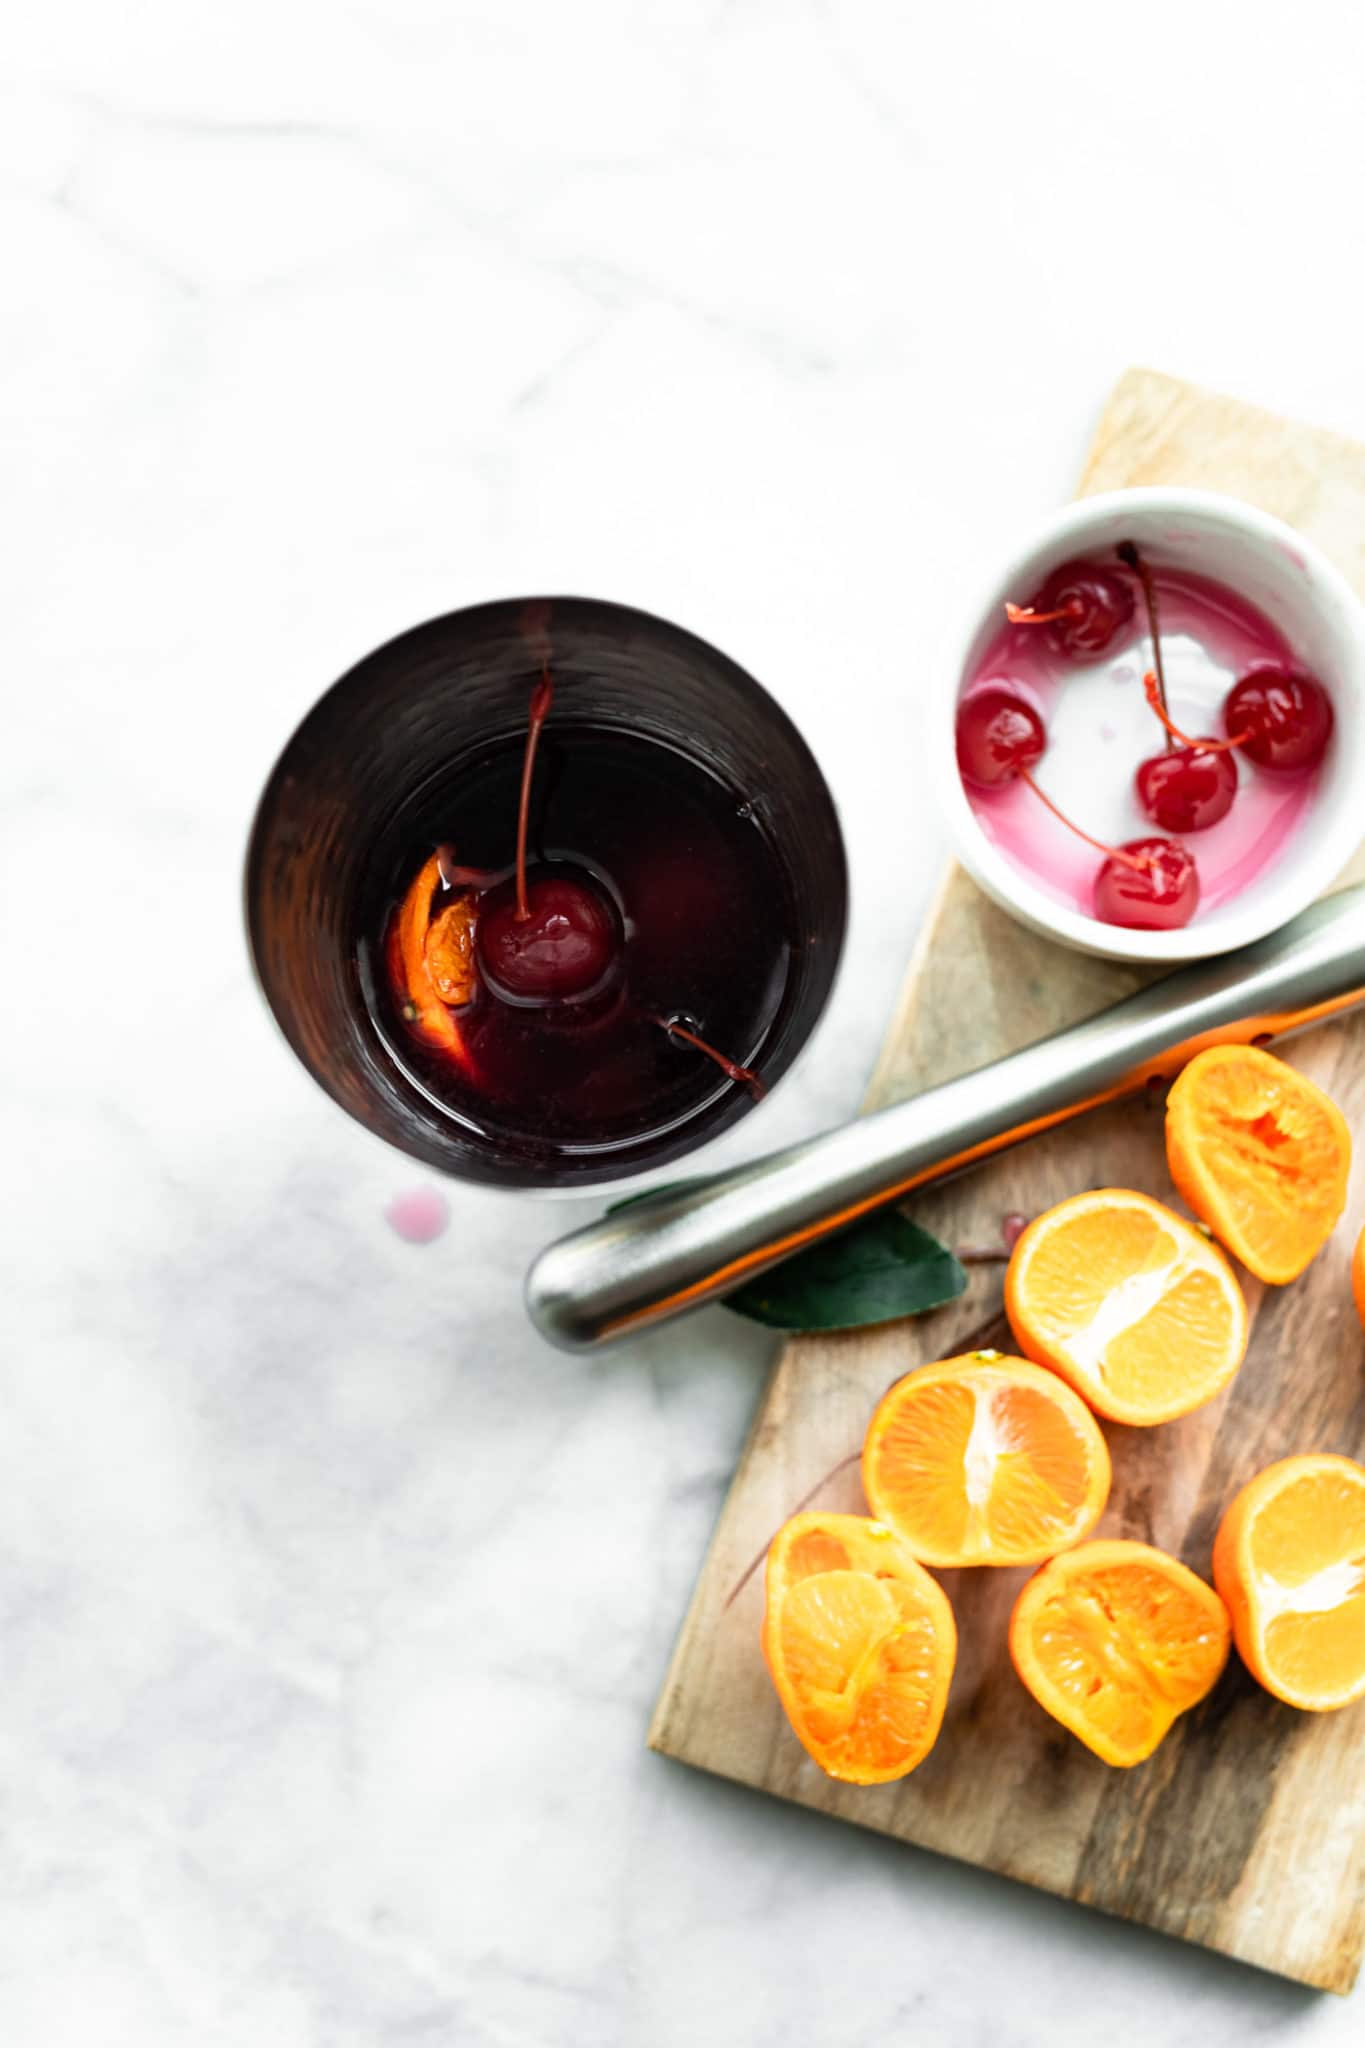 ingredients for a yuletide moon red wine cocktail in a cocktail shaker with a cutting board topped with sliced oranges and a white bowl containing cherries